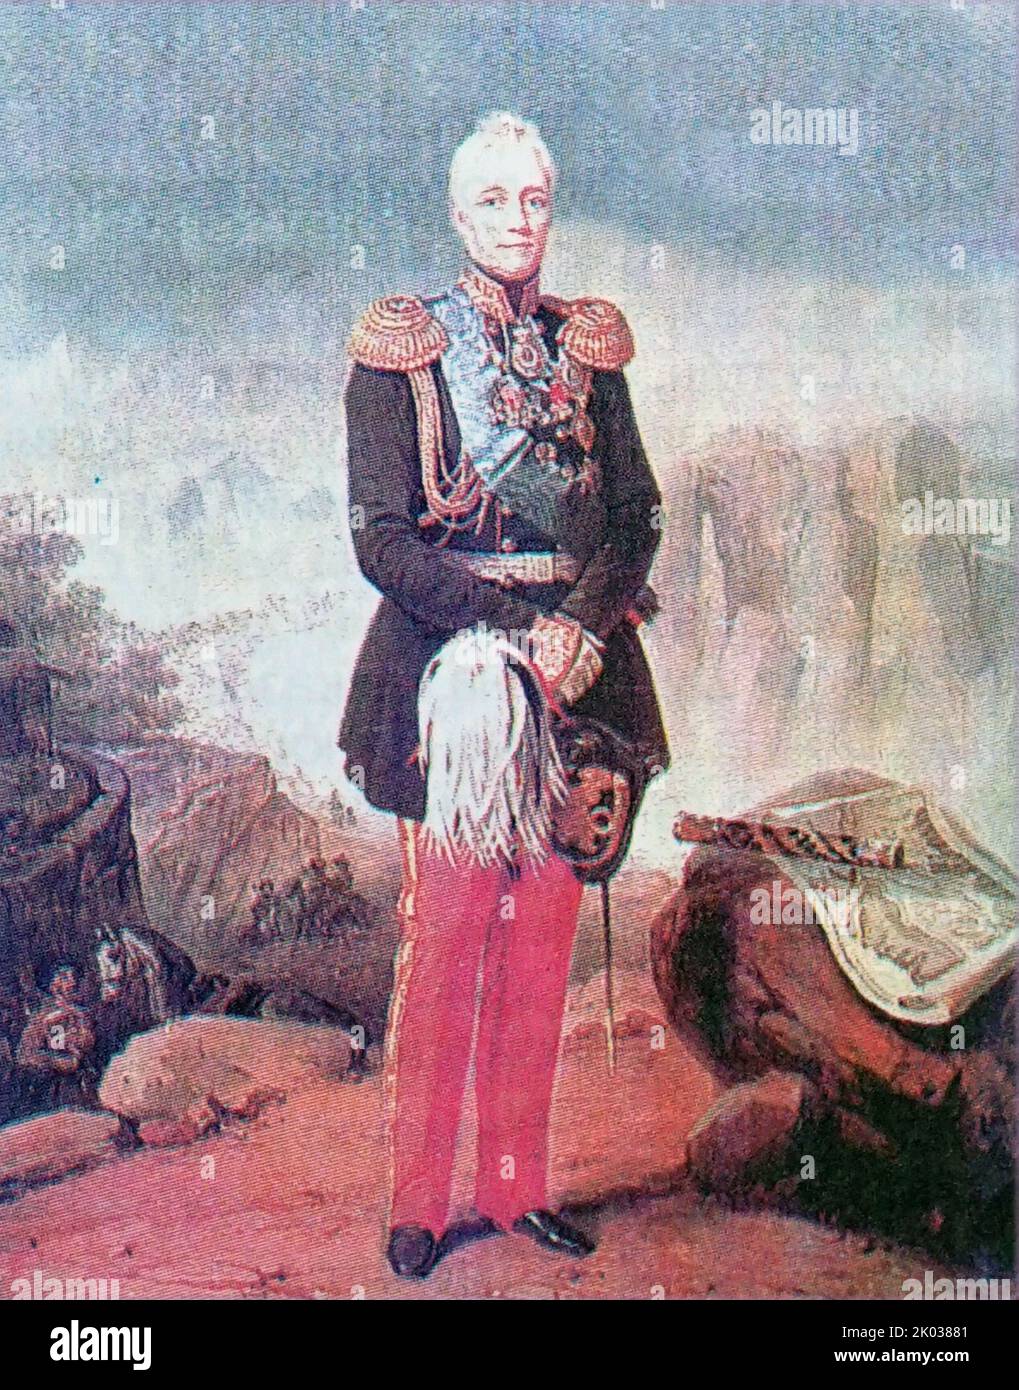 Prince Mikhail Semyonovich Vorontsov (1782 - 1856) Russian nobleman and field-marshal, renowned for his success in the Napoleonic wars and most famous for his participation in the Caucasian War from 1844 to 1853. Stock Photo